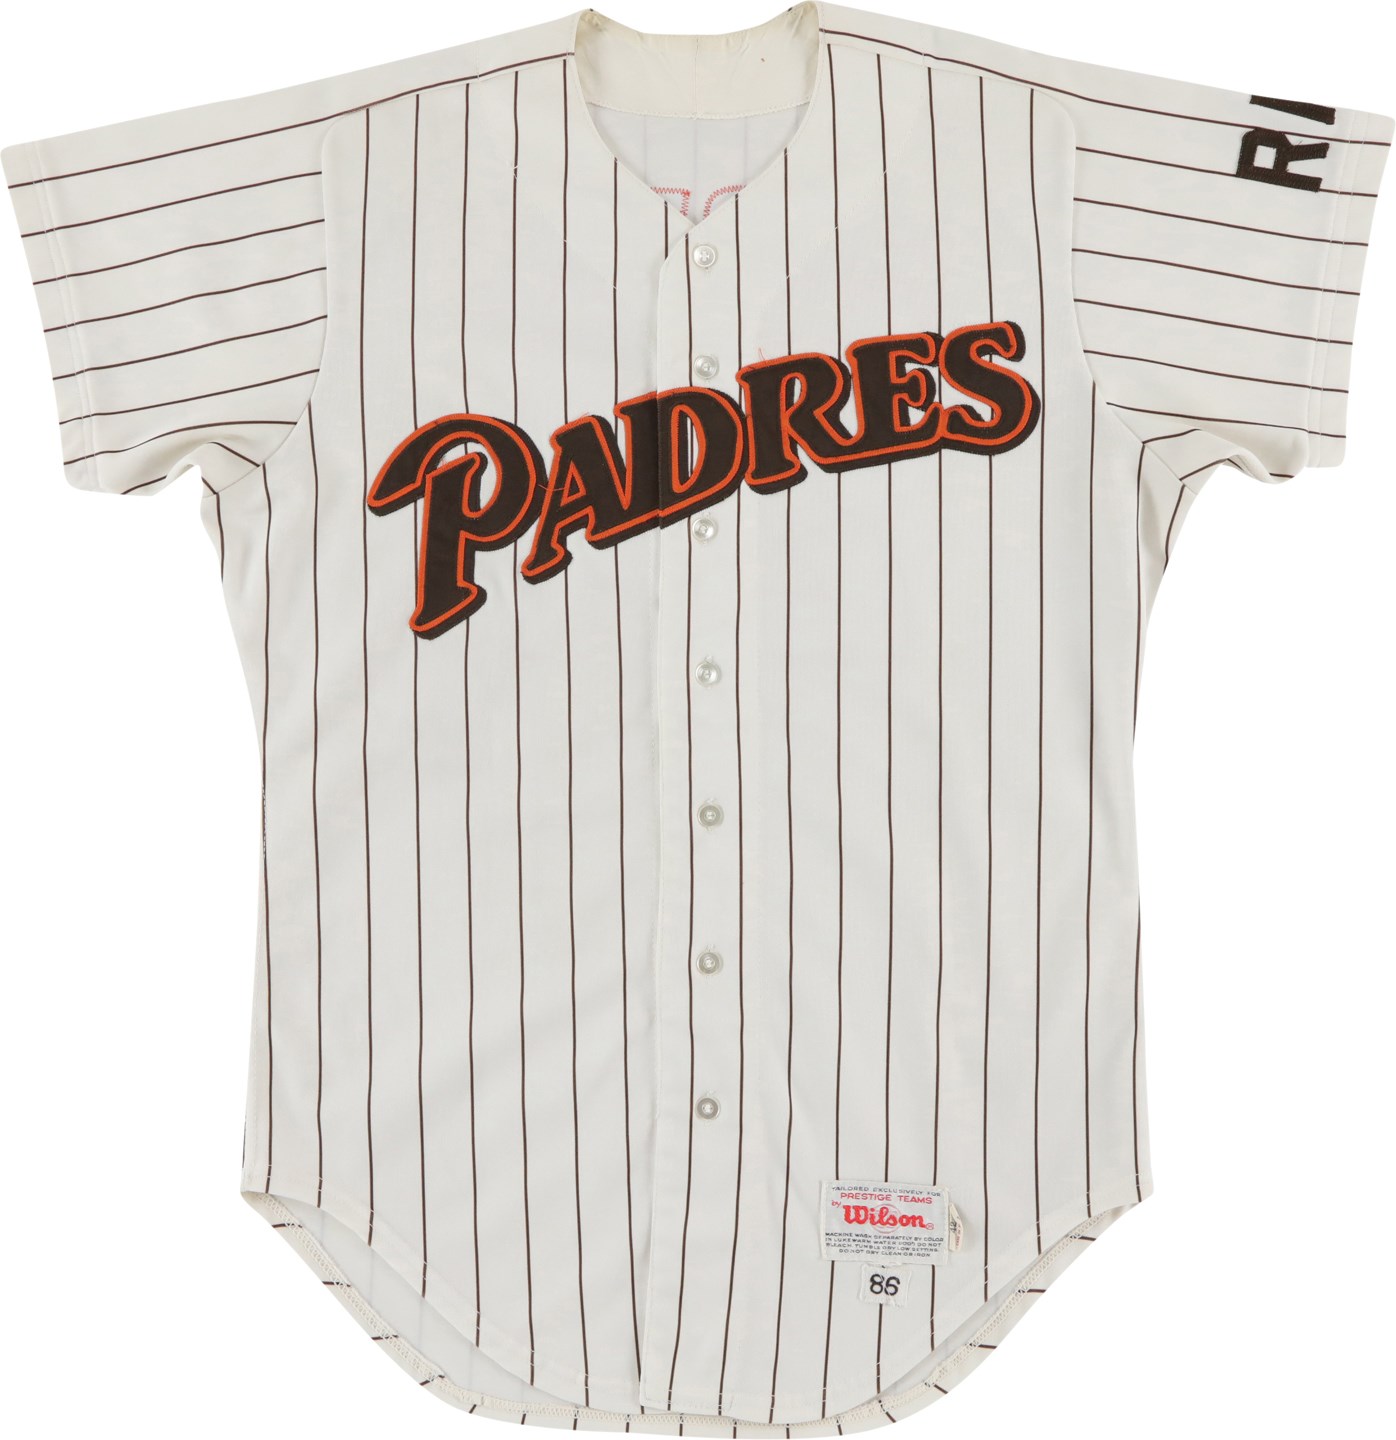 4/28/86 John Kruk Rookie 1st Stolen Base and Career Hit #6 San Diego Padres Game Worn Jersey (Photo-Matched)